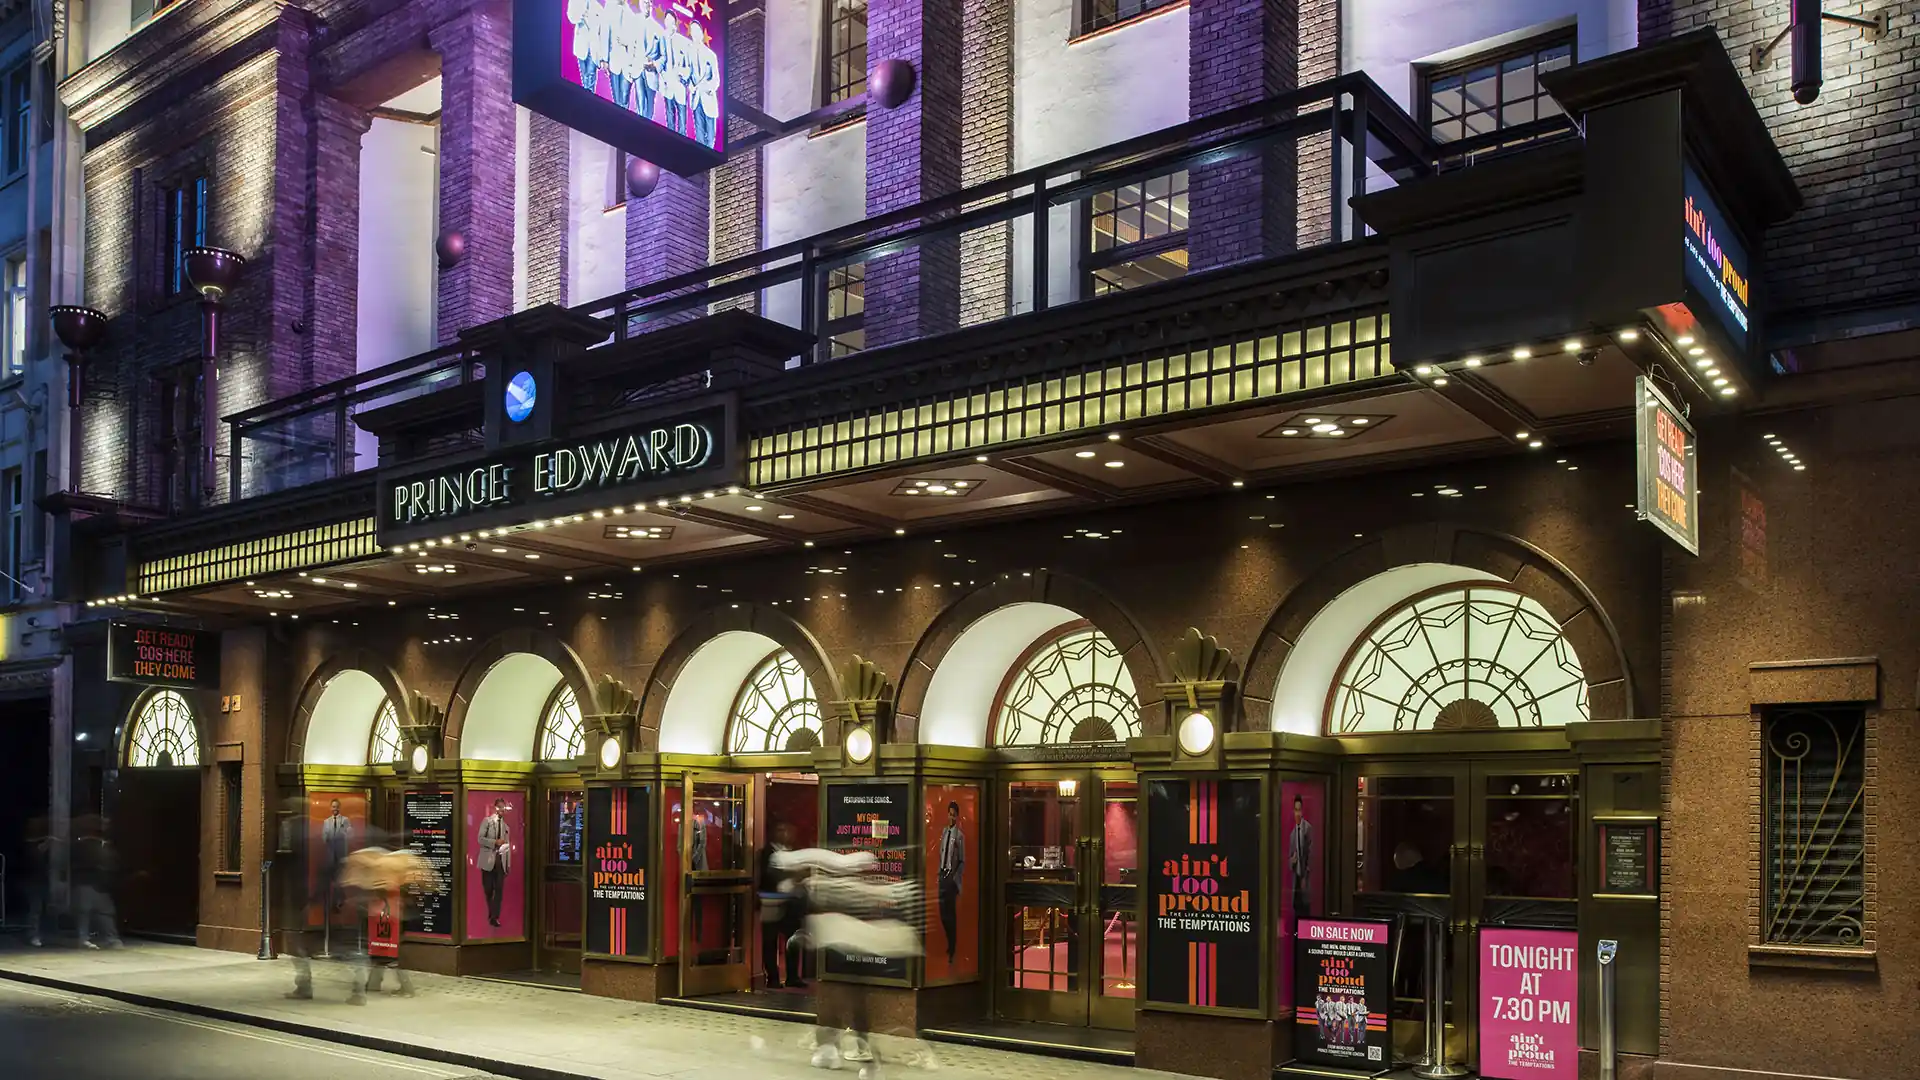 Exterior photo of the Prince Edward Theatre in London's West End